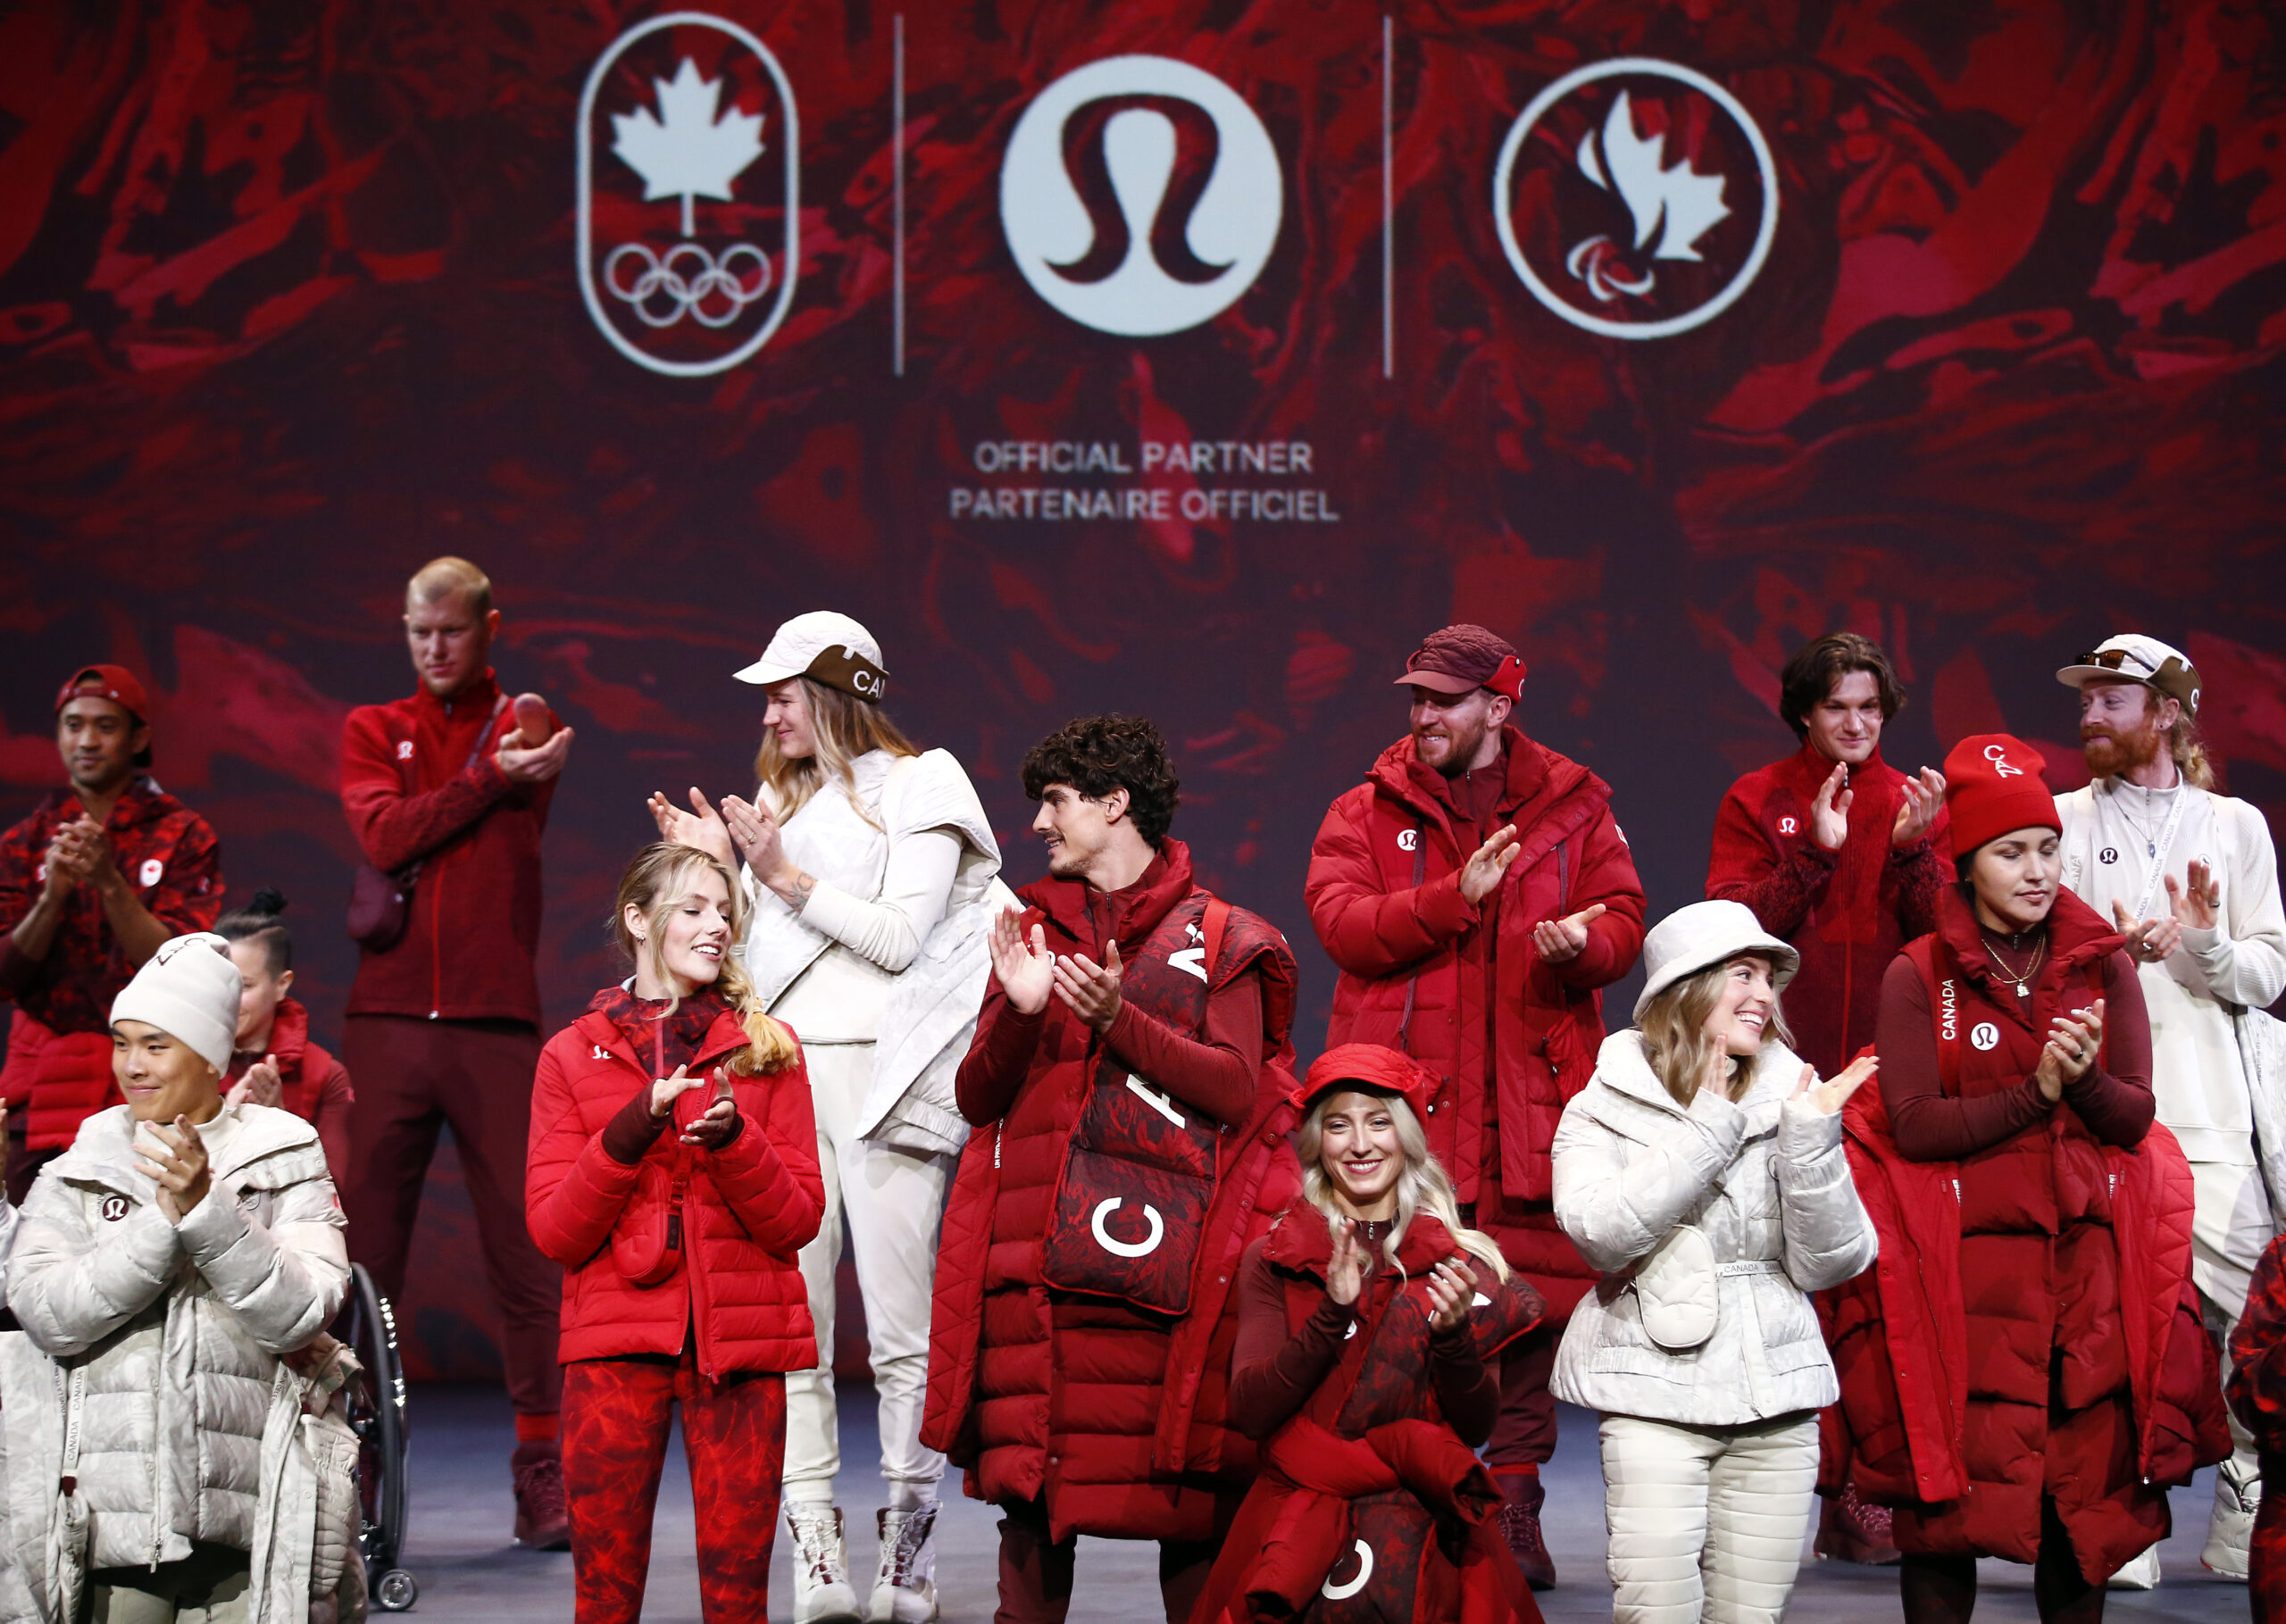 Lululemon Officially Launches The Olympic and Paralympic Athlete Kit